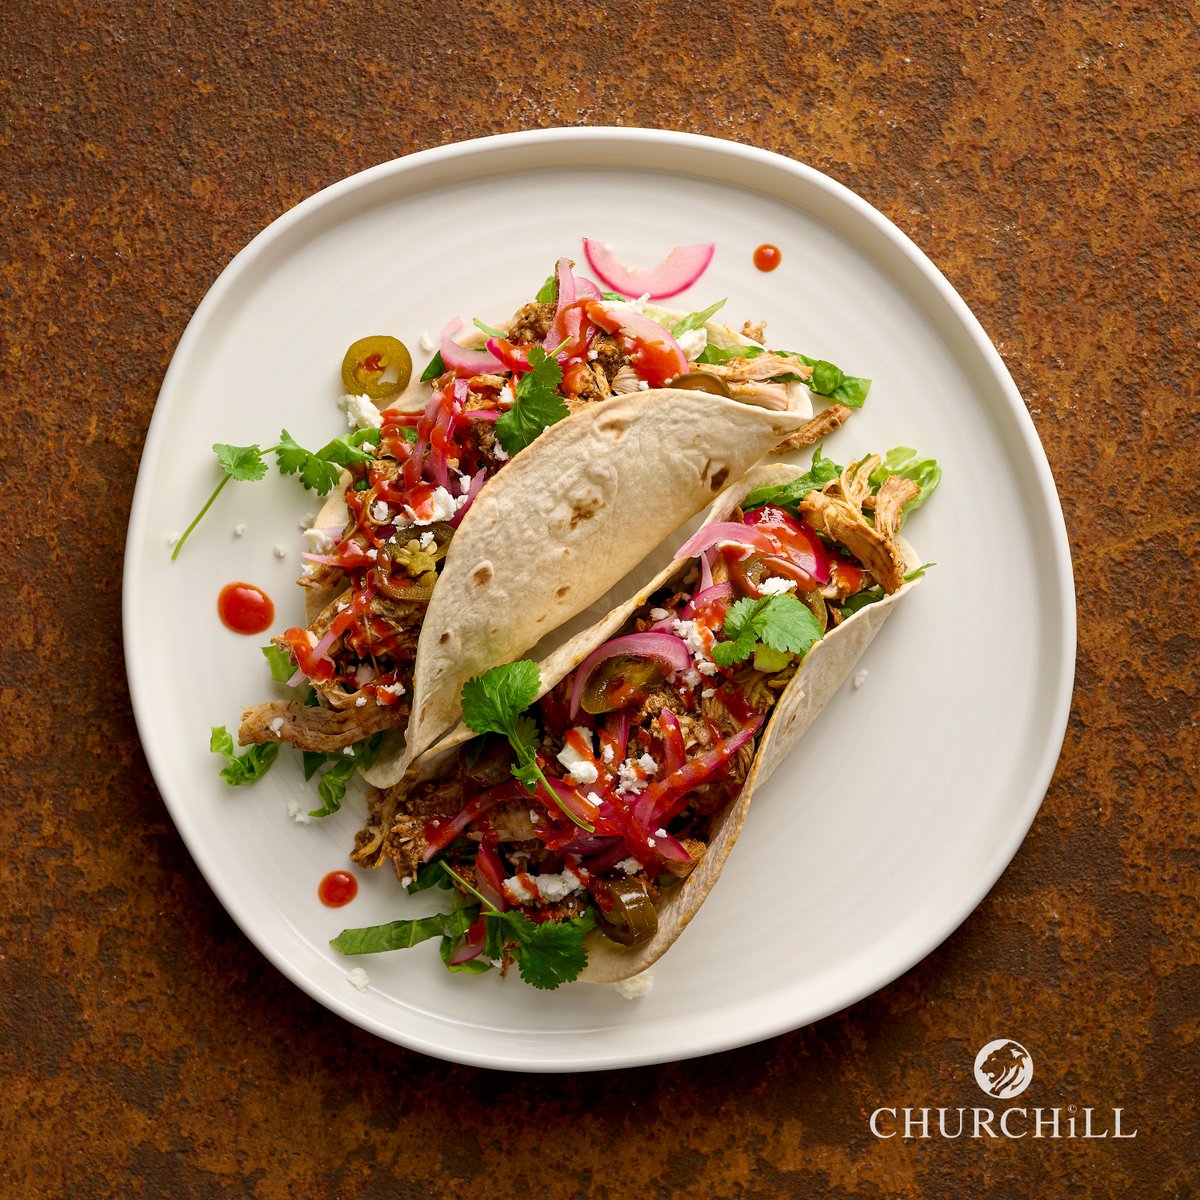 We have a great selection of chefs plates available form @churchill1975. Innovative tableware shapes, Churchills Chefs’ Plates add value to simplistic white tabletops. Soft, organic triangles and contemporary oblongs are ideal for sharing plates and smaller table settings.